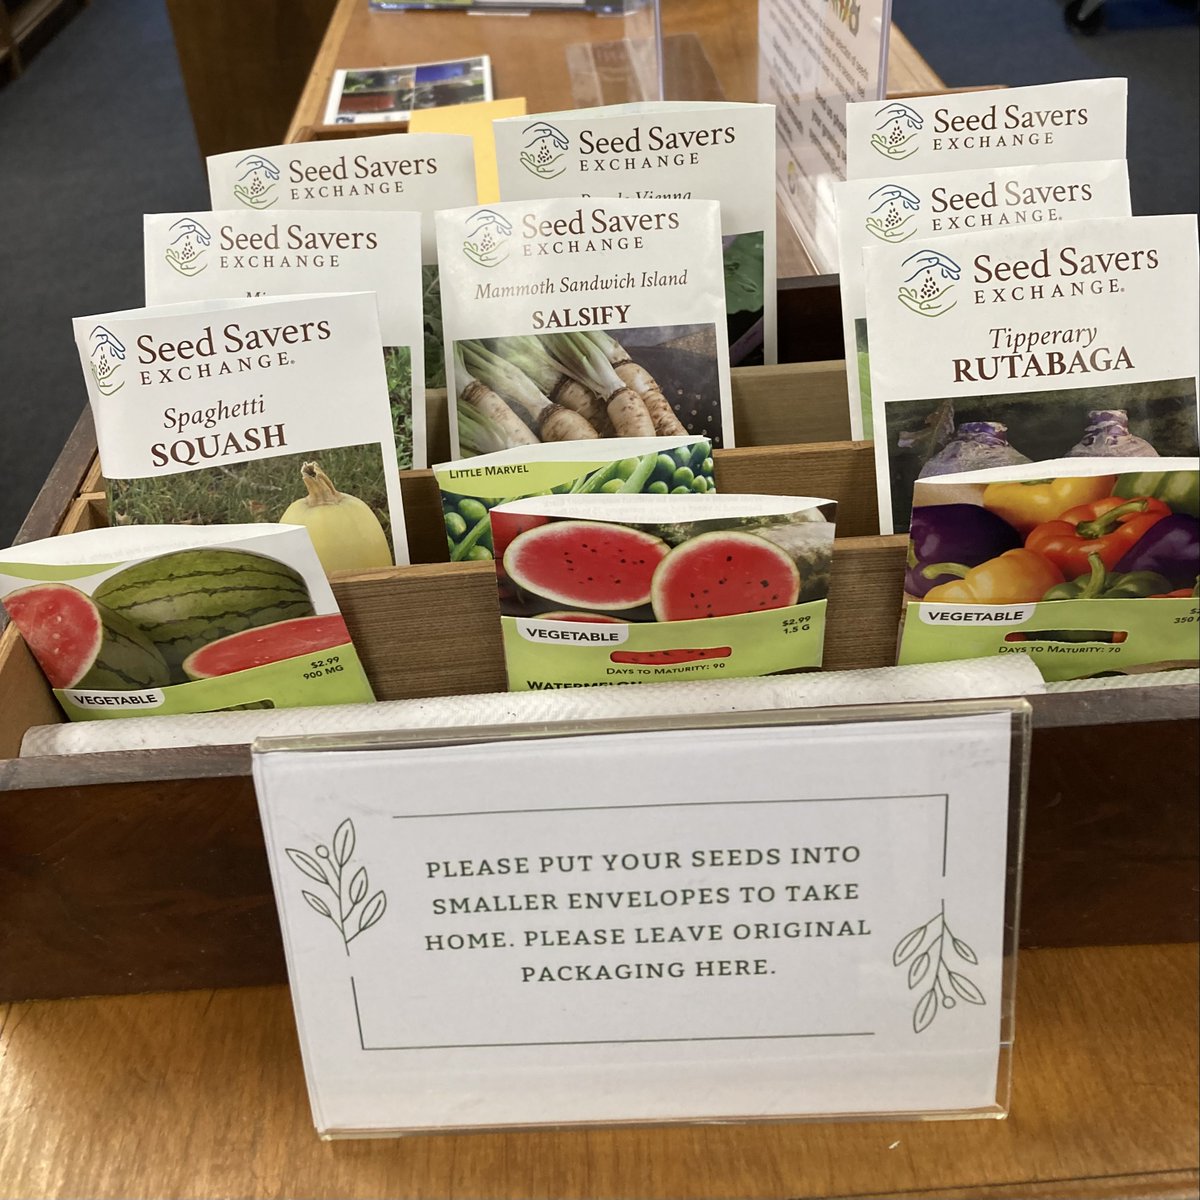 Rutabaga? Salsify?? Our seed libraries at the South and West Yarmouth Libraries give you a chance to try planting something entirely new - or an old favorite. They are still going strong and it's been a lovely sunny week to start seeds indoors.